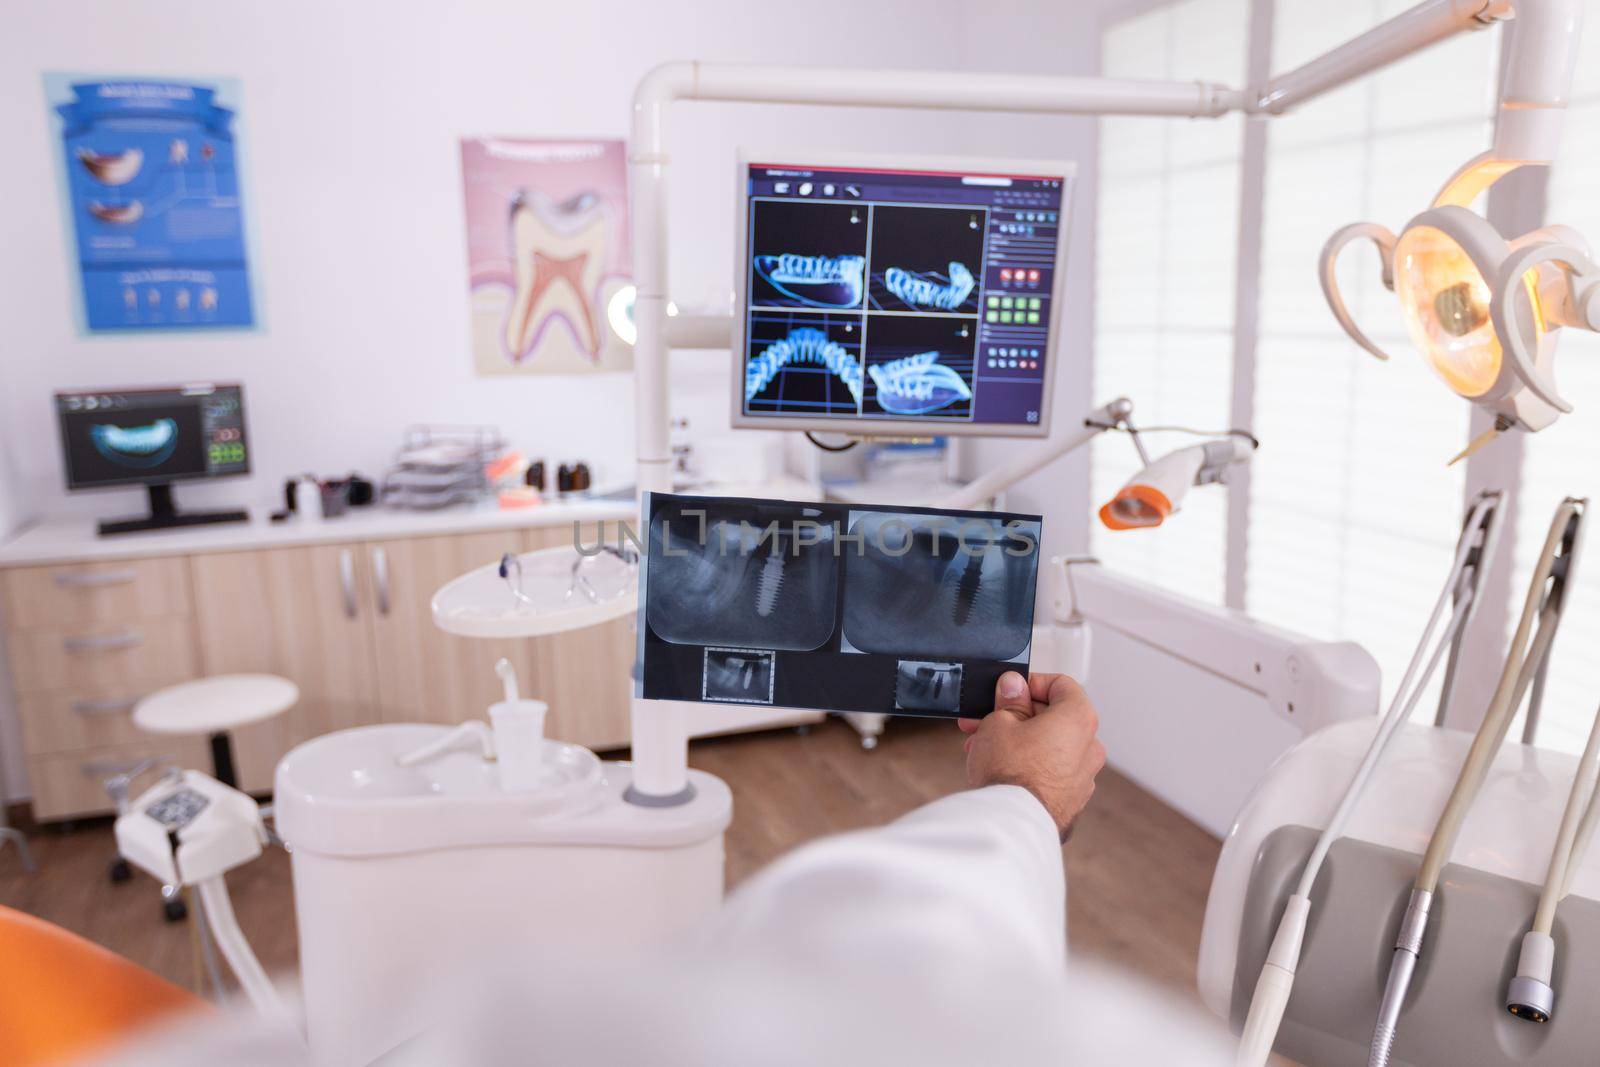 Radiologist man doctor comparing medical teeth radiography expertise with oral dental xray on monitor planning teethcare treatment. Orthodontist working in stomatology hospital office room